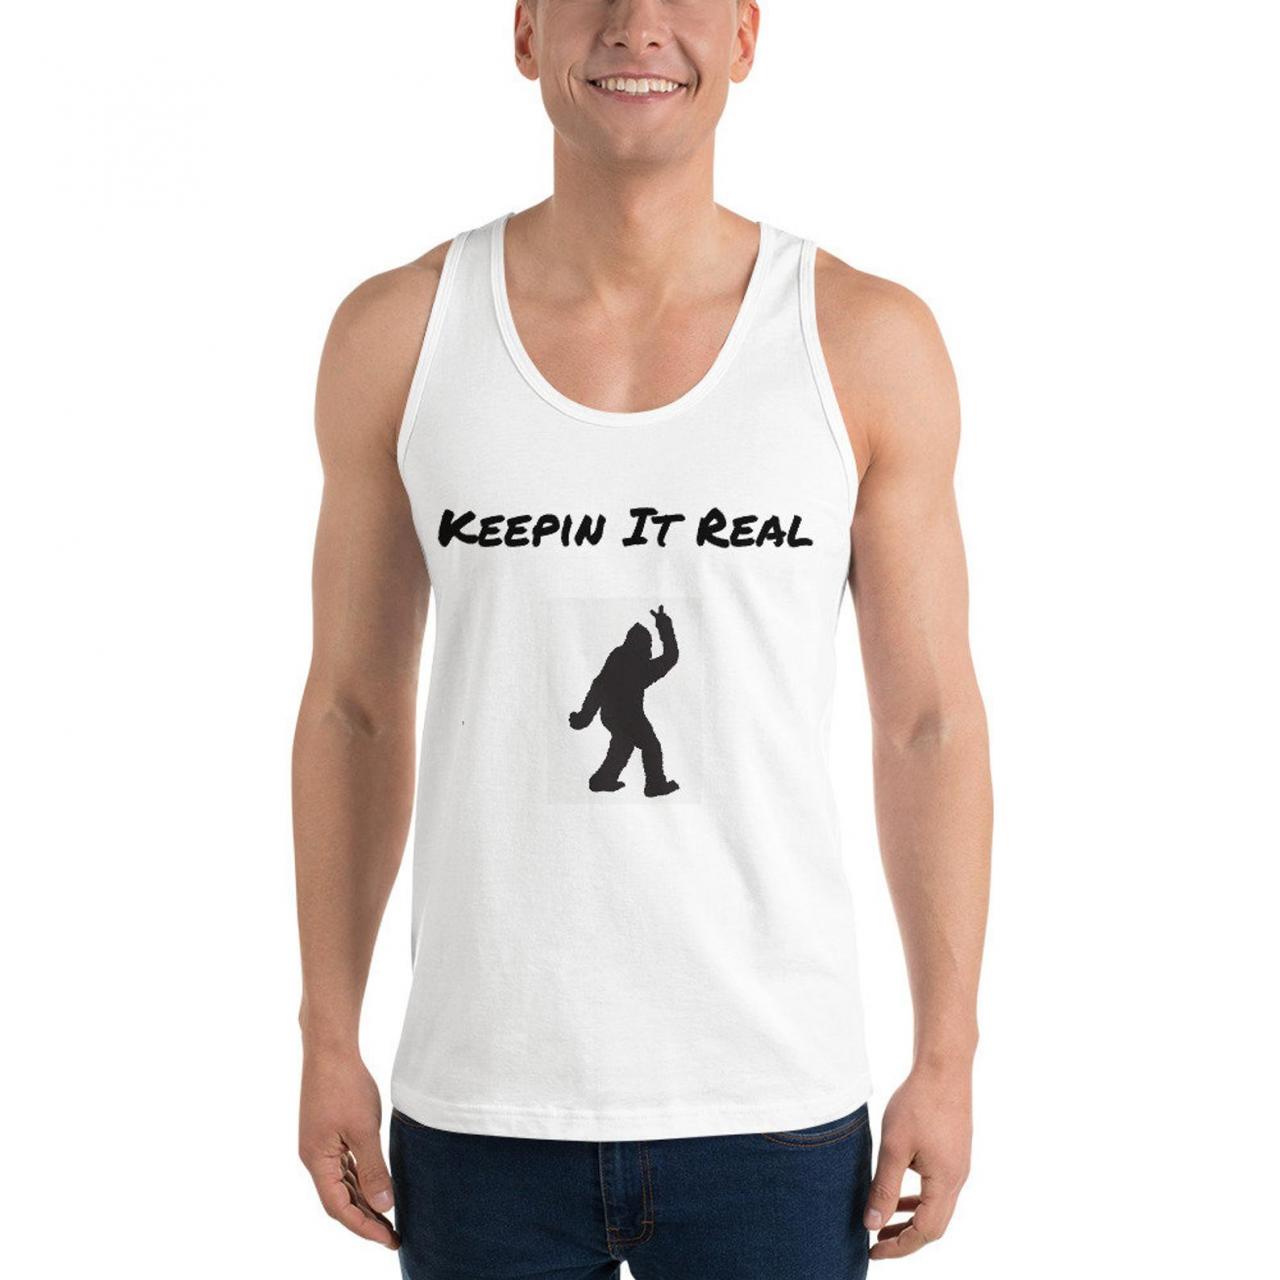 Sasquatch Funny Tank, Cryptozoology, Cool Tank, For Women And Men.